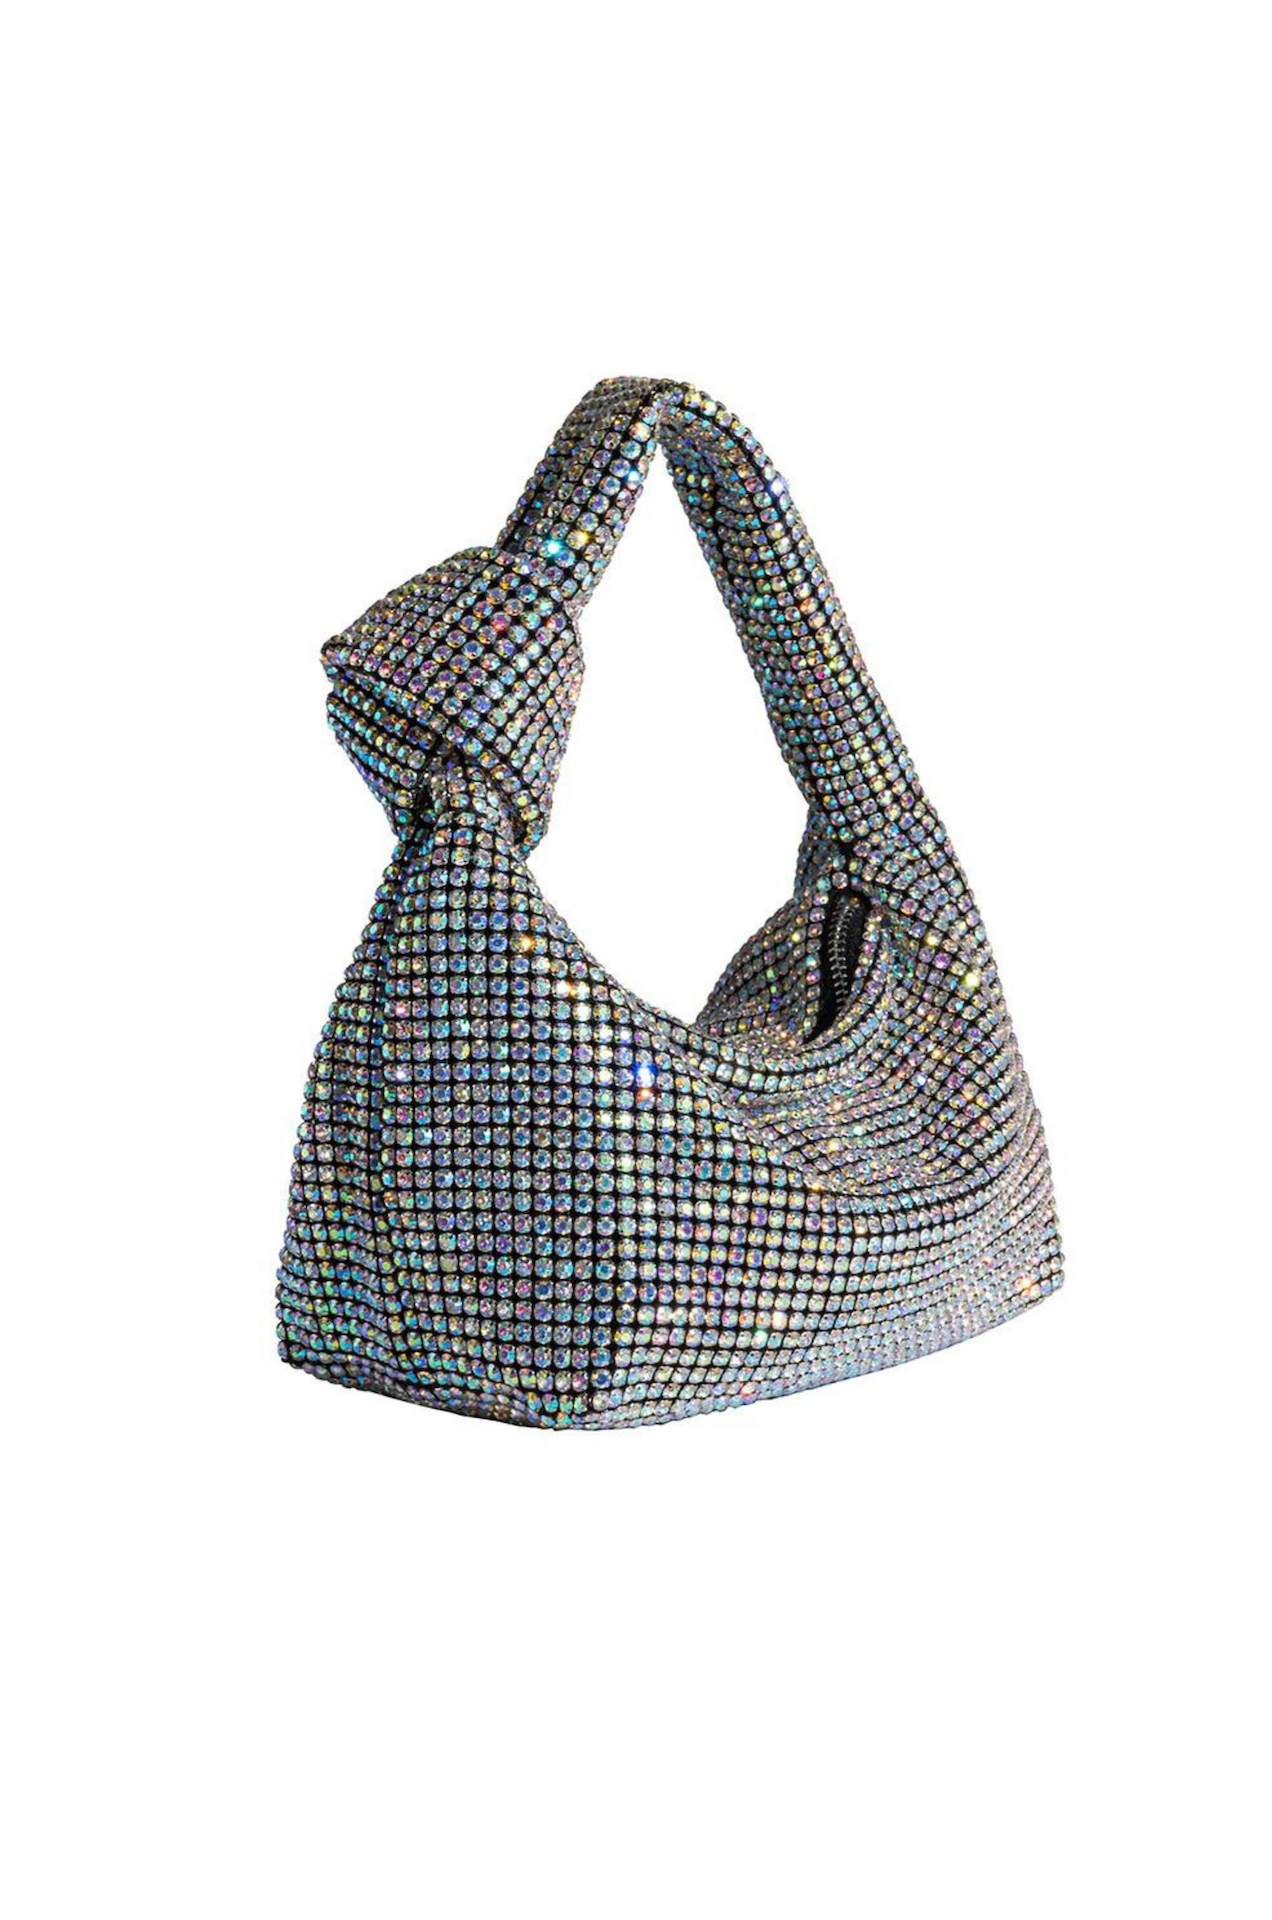 silver rhinestone knot top handle bag by melie Bianco 